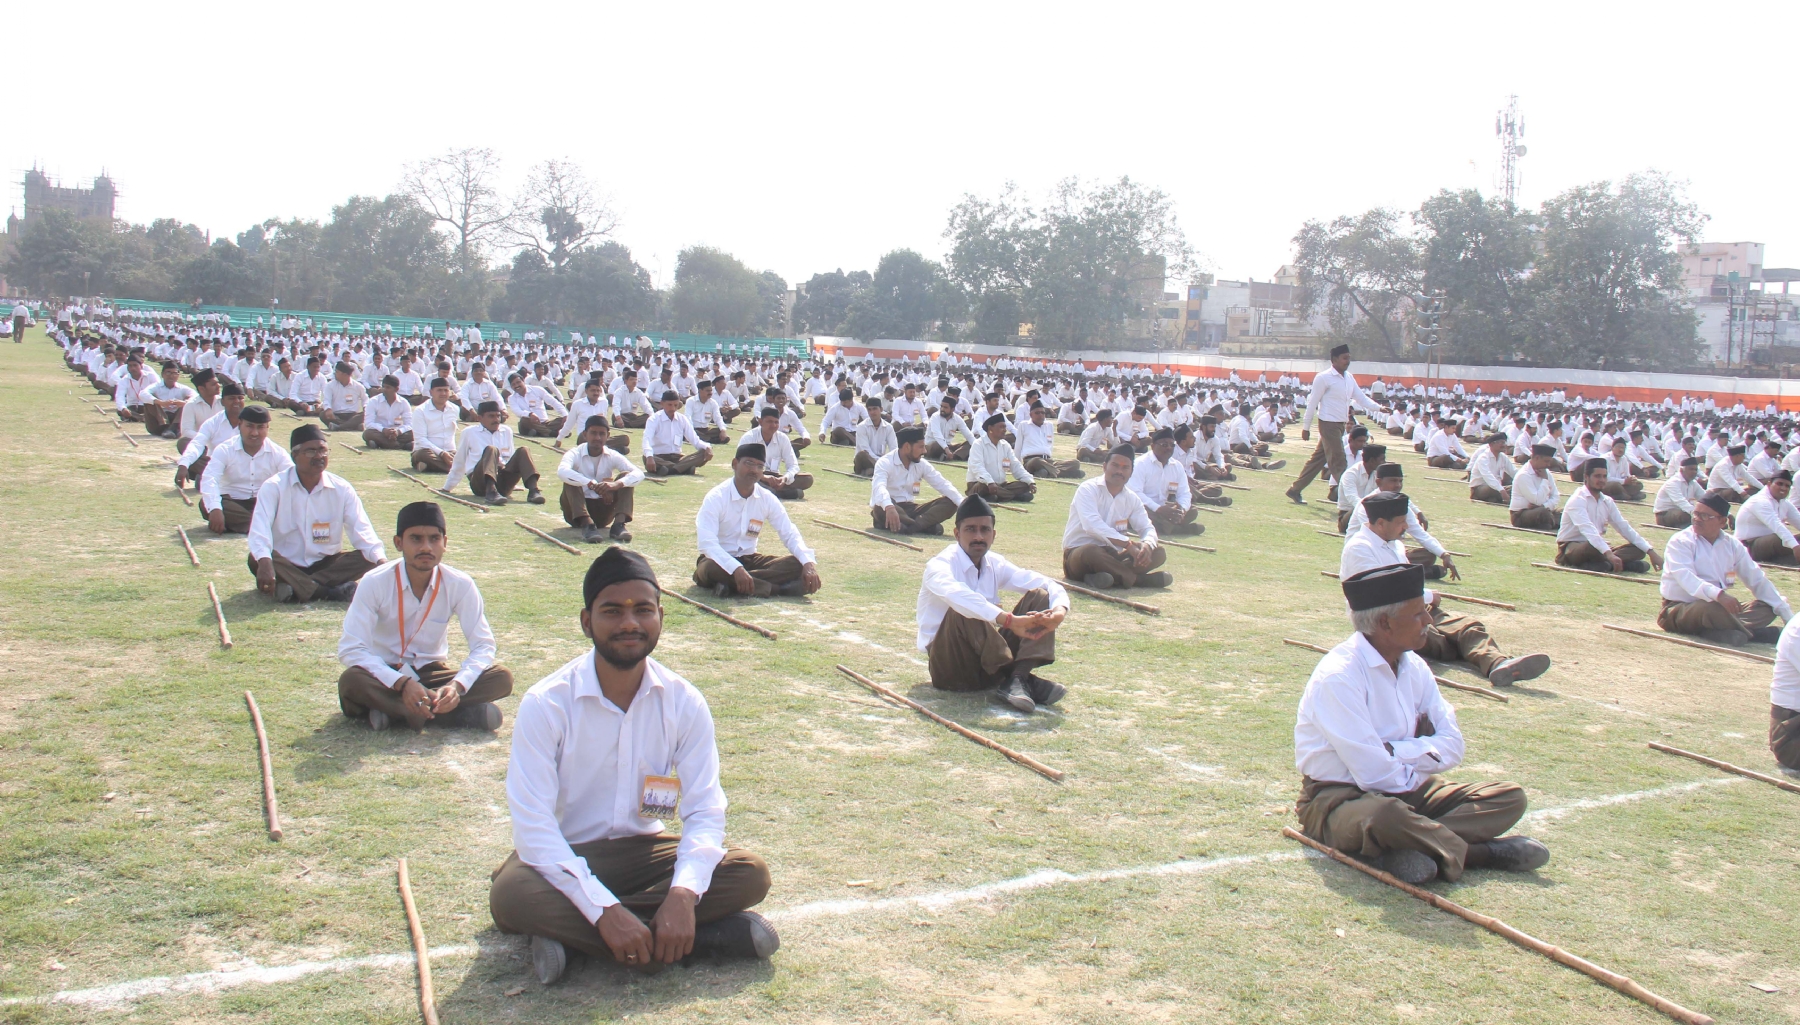 RSS workers at a rally. (Supplied)